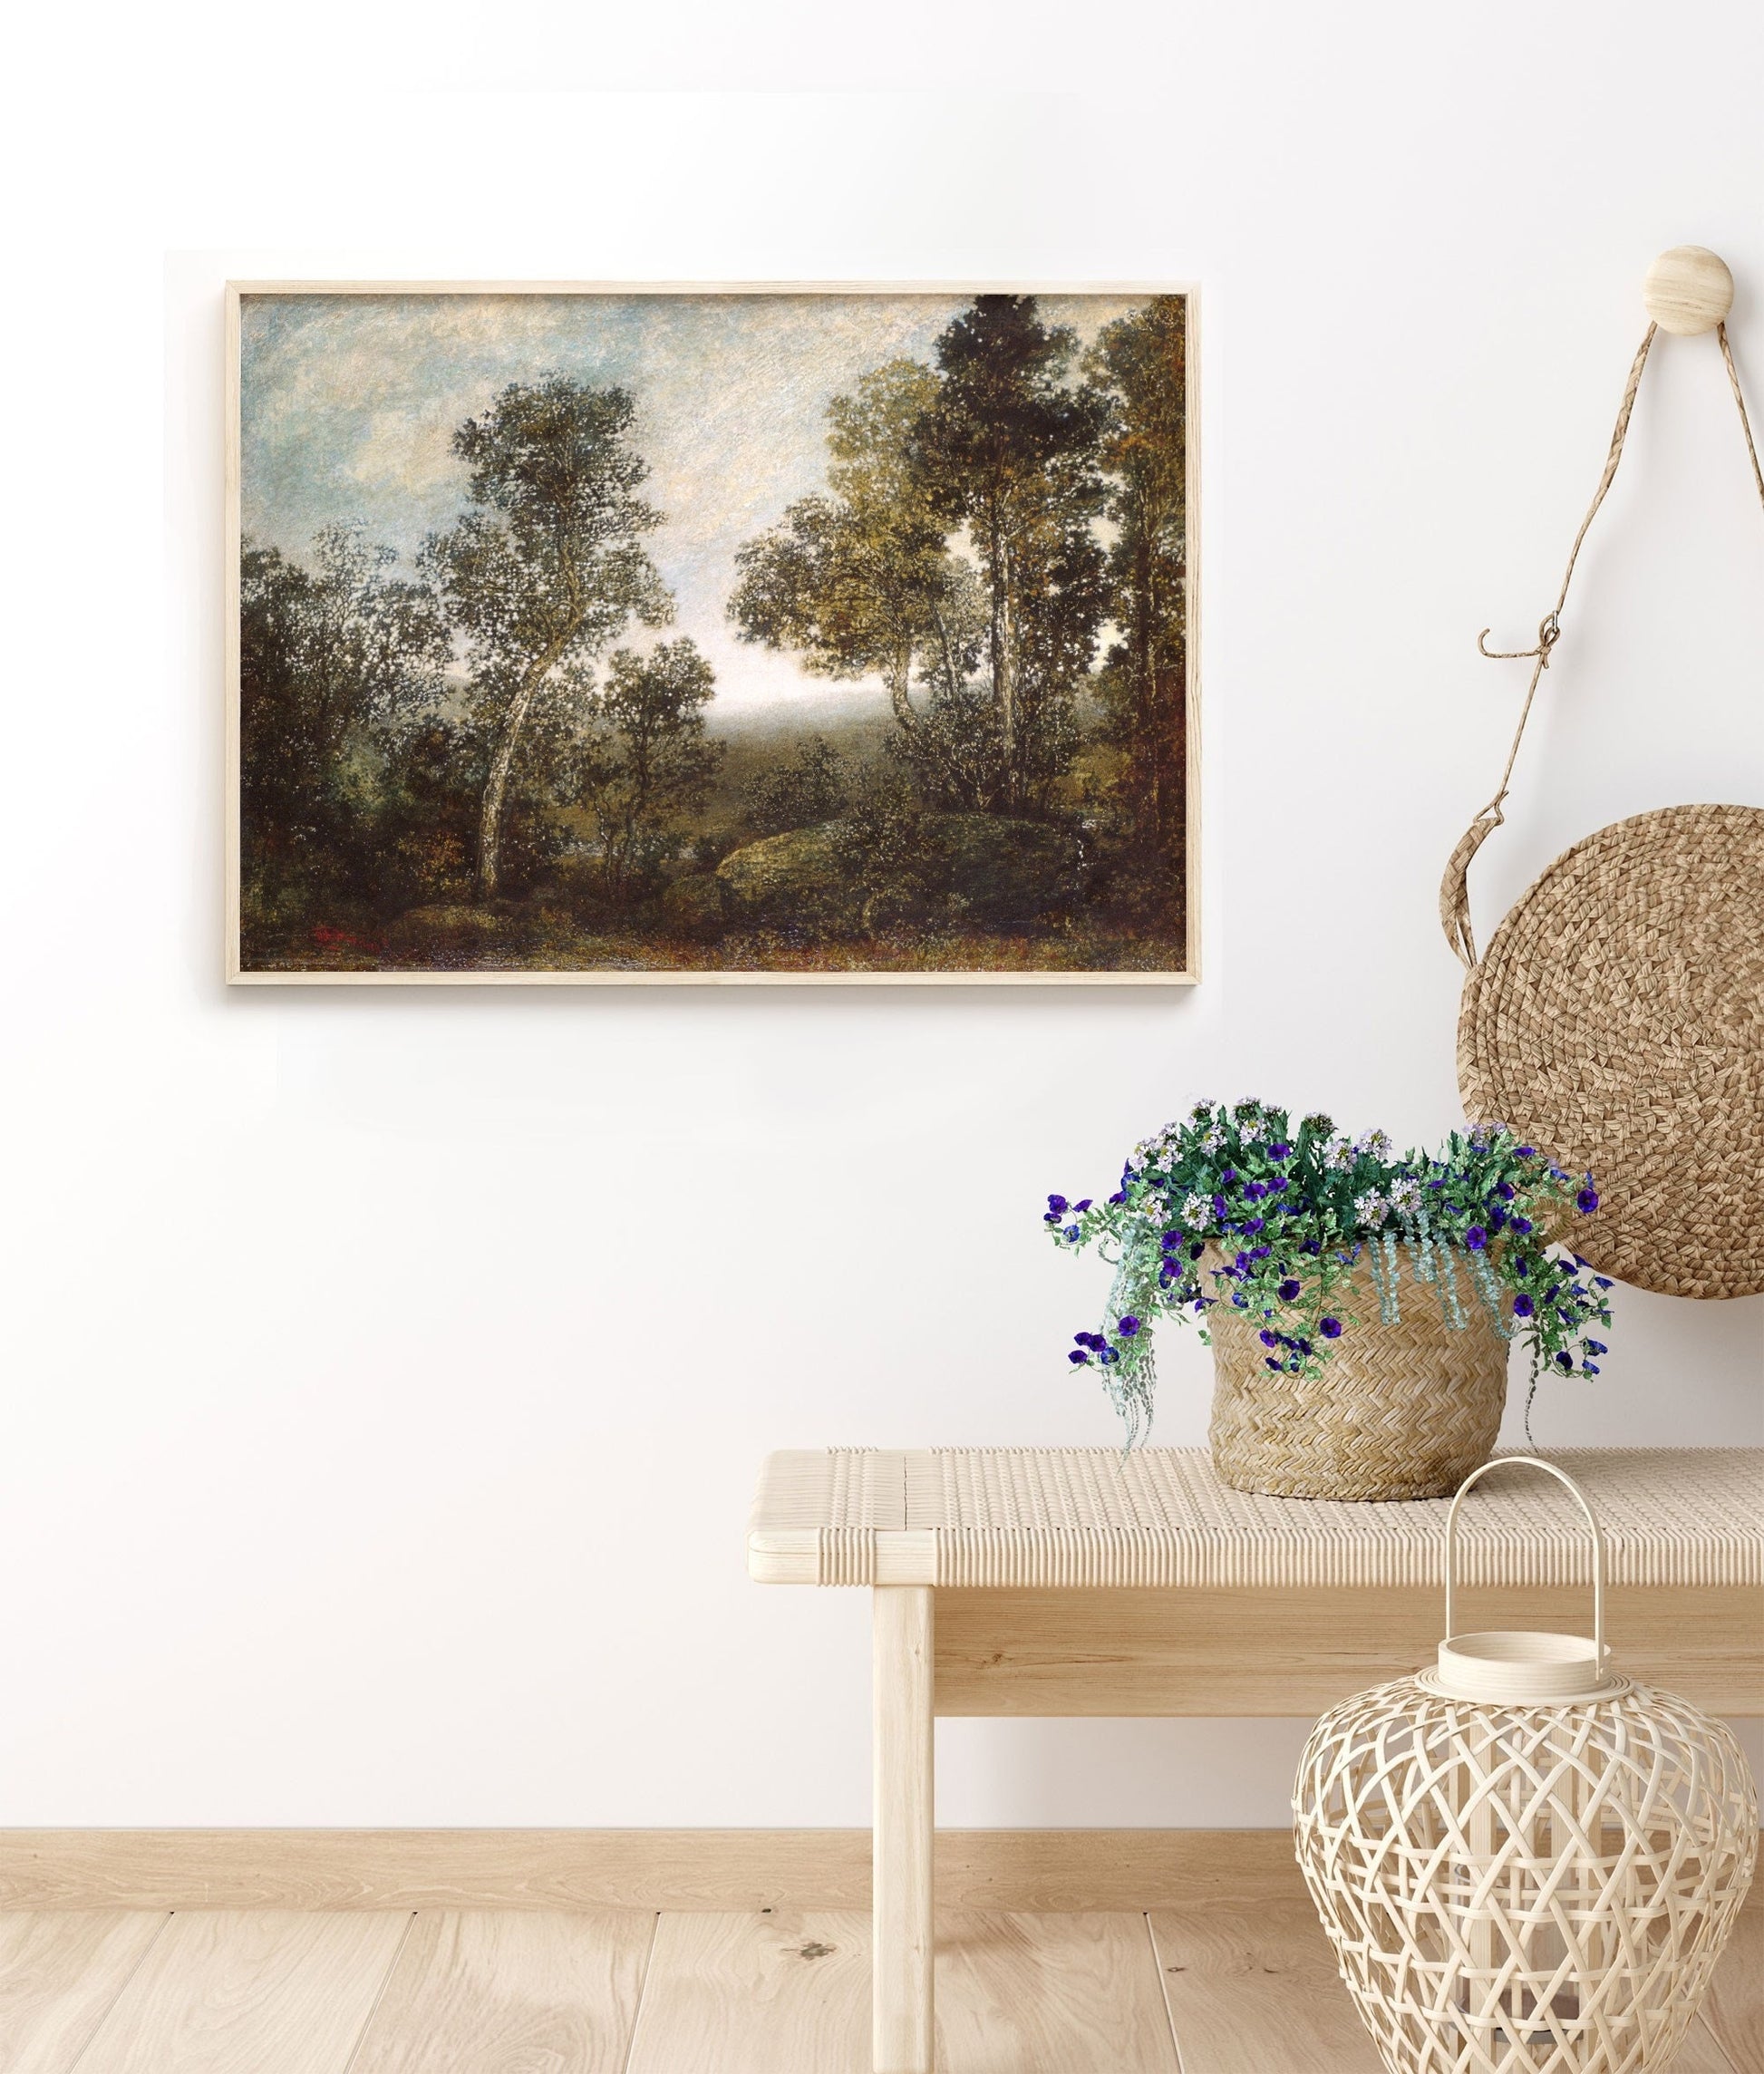 Vintage Landscape Wall Art by American Painter 